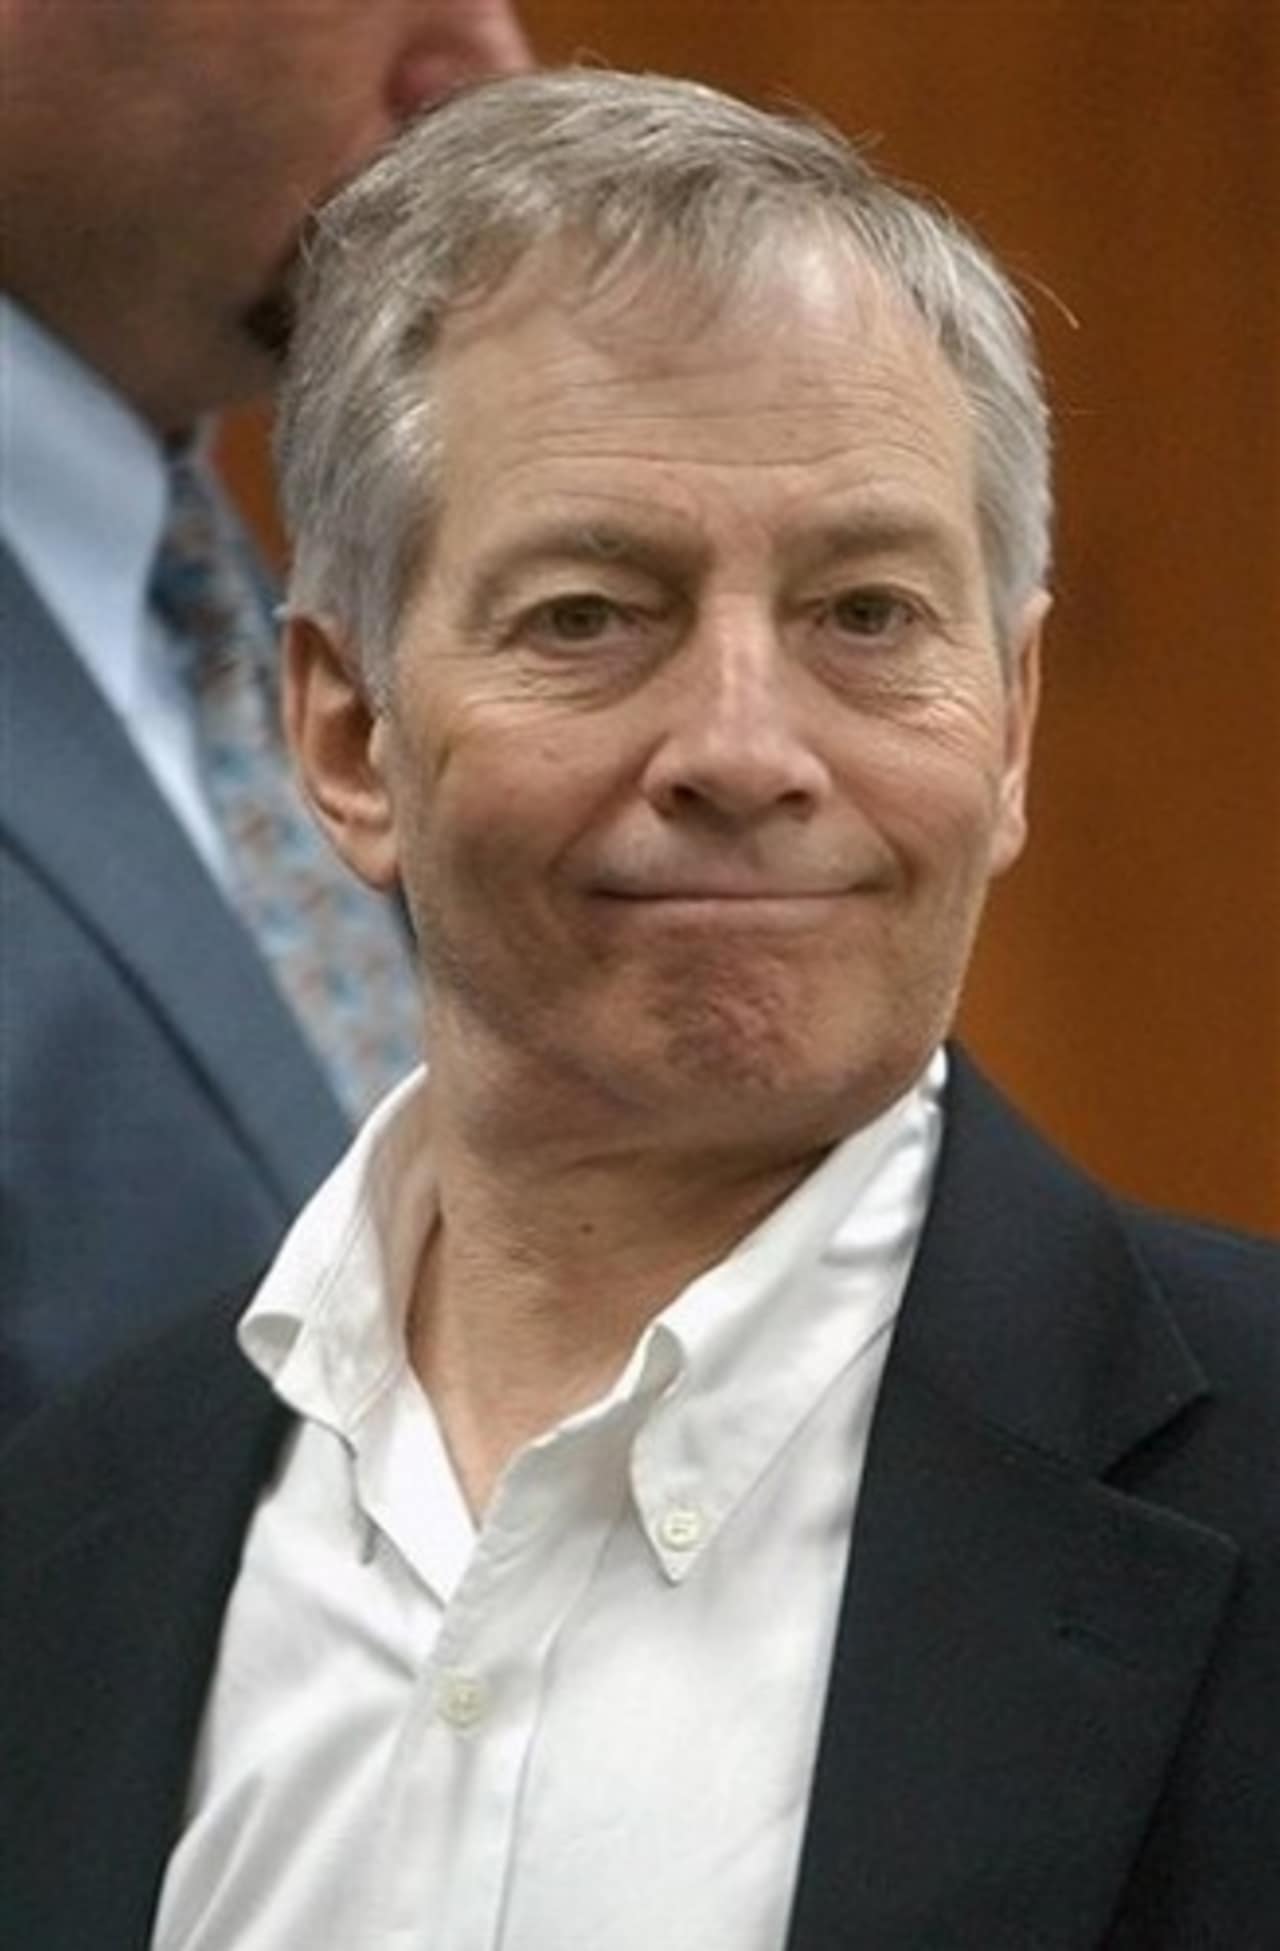 Robert Durst said he did "The Jinx" to look more human, court documents released on Friday indicate.